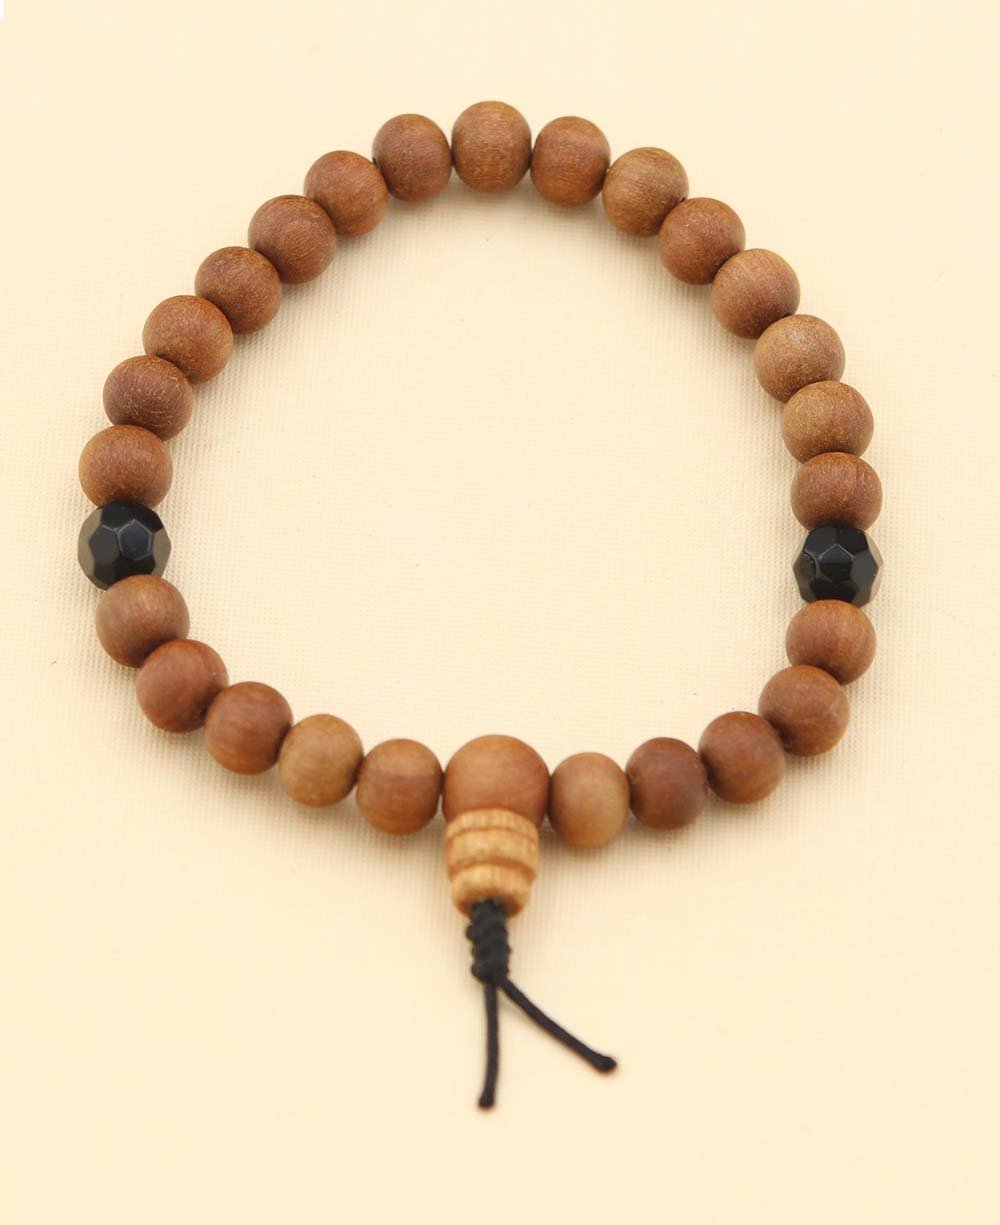 Mala Prayer Beads Bracelet,Stretch Bracelet,Wood,Buddha Beads Bracelet for  Men,Meditation Yoga Prayer Cuff Jewelry,Hand Polished Gift  Accessories(Size:16cm) (Color : Onecolor, Size : 16 (Color : On :  : Clothing, Shoes & Accessories